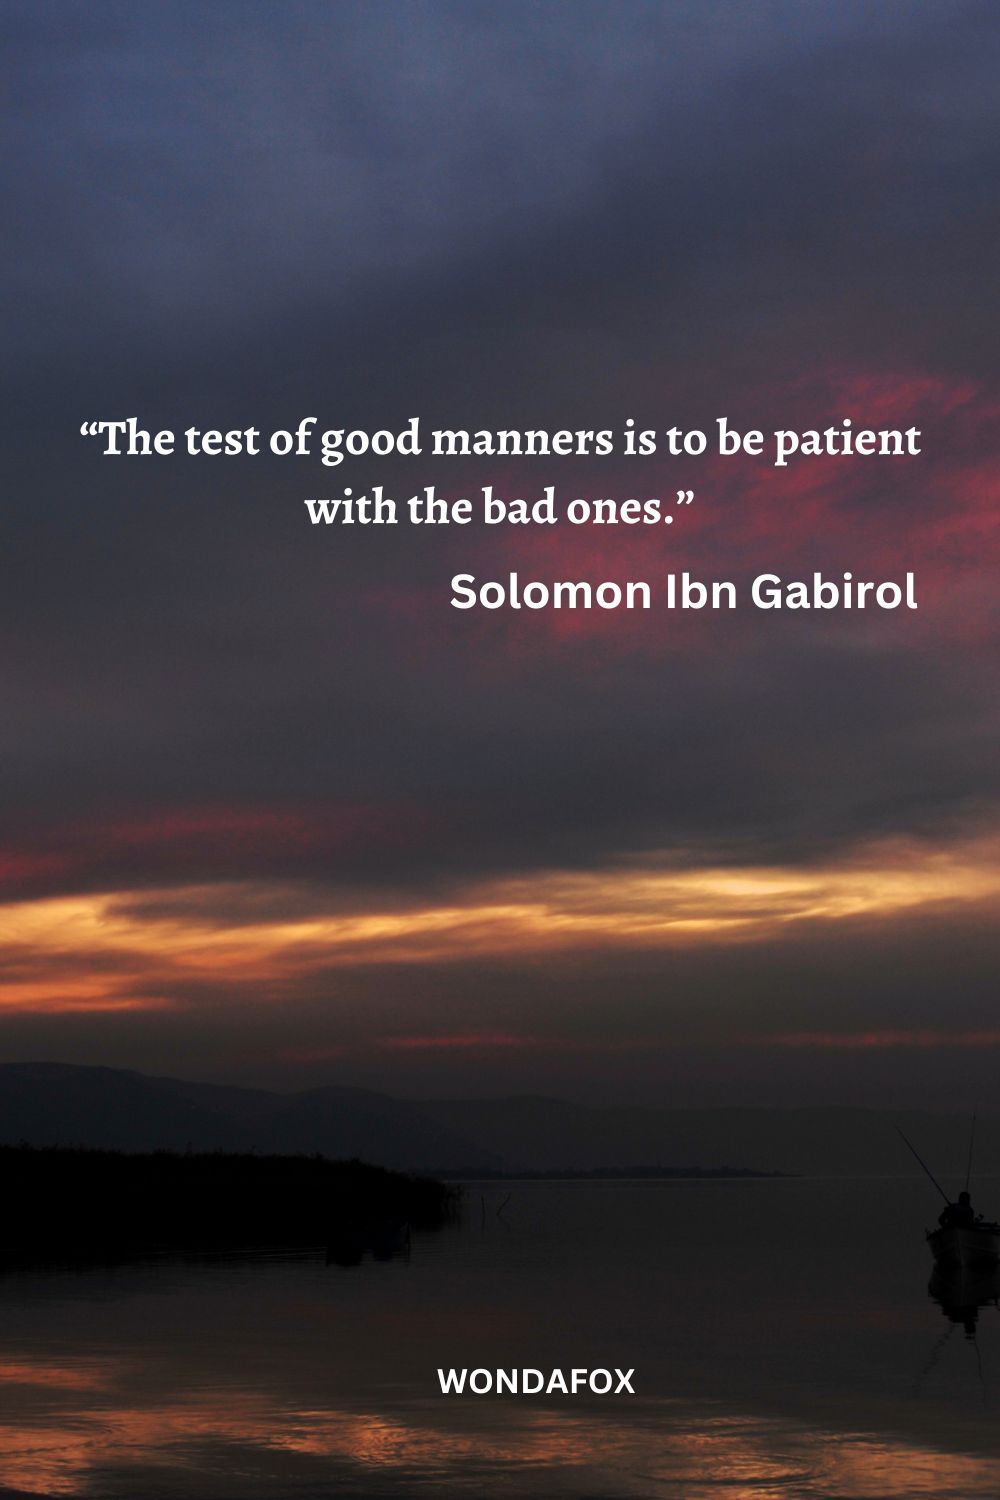 “The test of good manners is to be patient with the bad ones.”
Solomon Ibn Gabirol